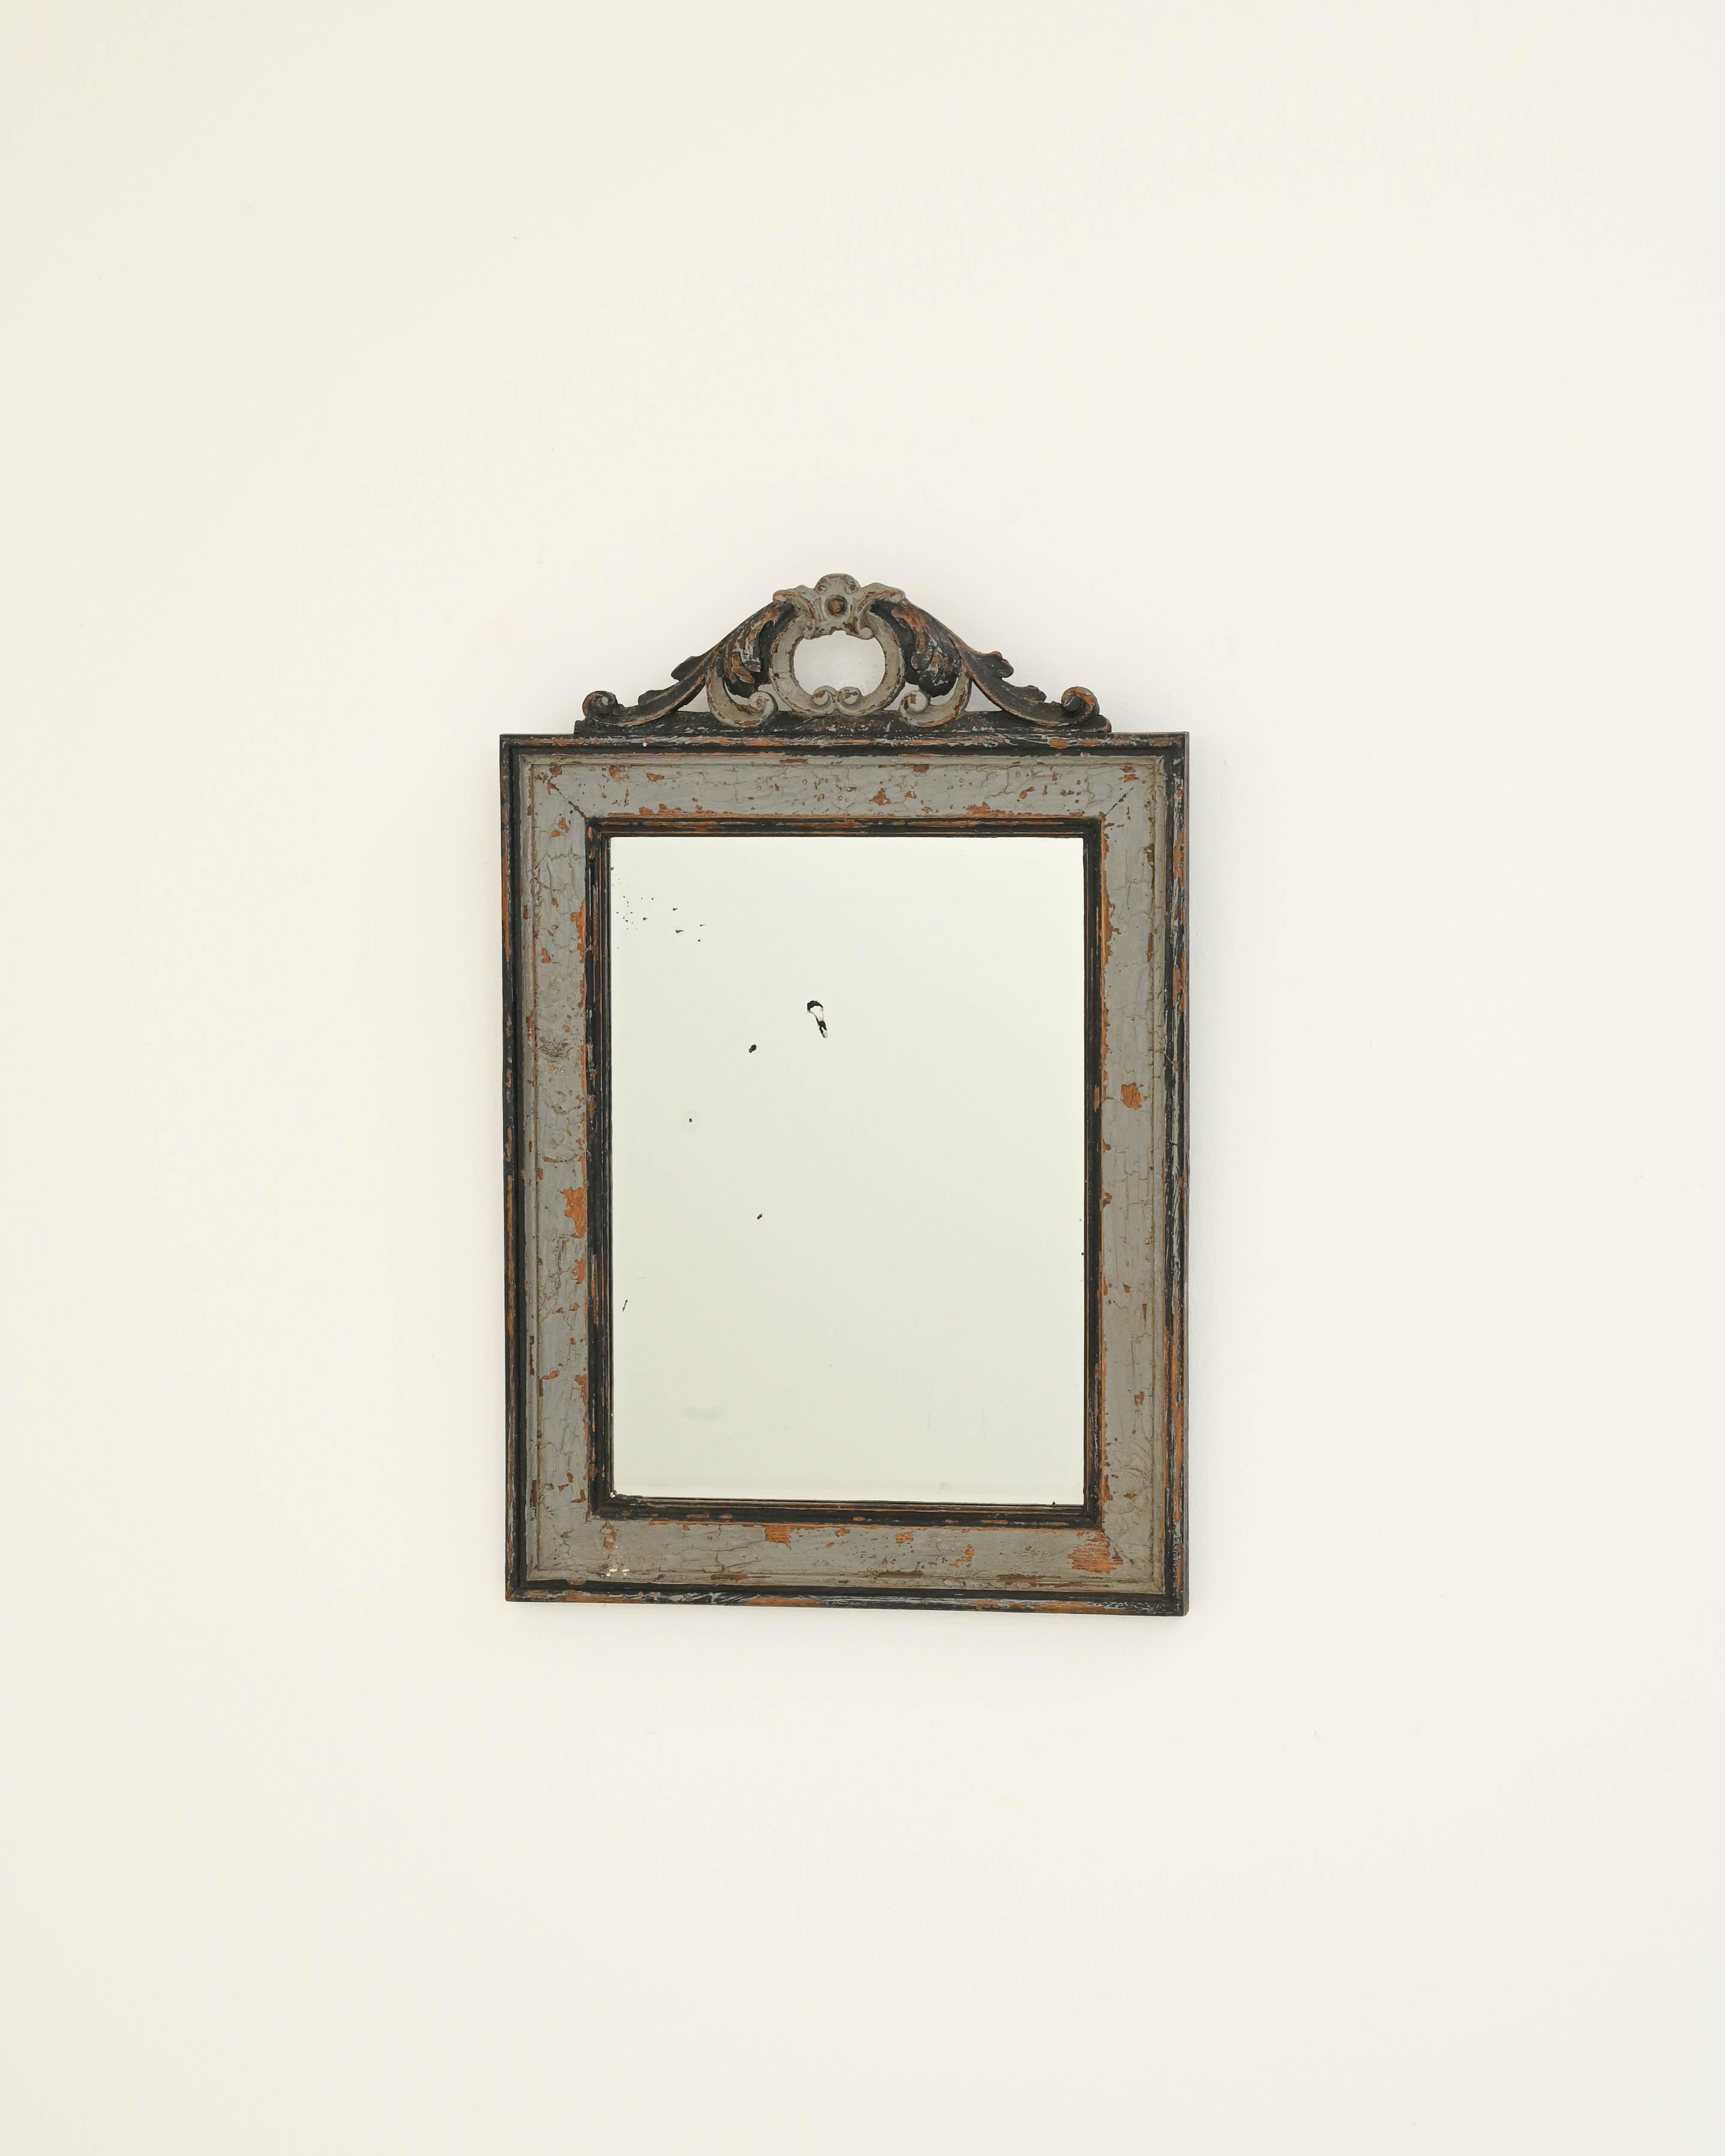 Displaying a gracefully weathered gray patina that delicately peels away, forming intriguing vein patterns, this 19th-century French-looking glass embodies the timeless elegance of aged wooden frames. The mirror is adorned with a sophisticated